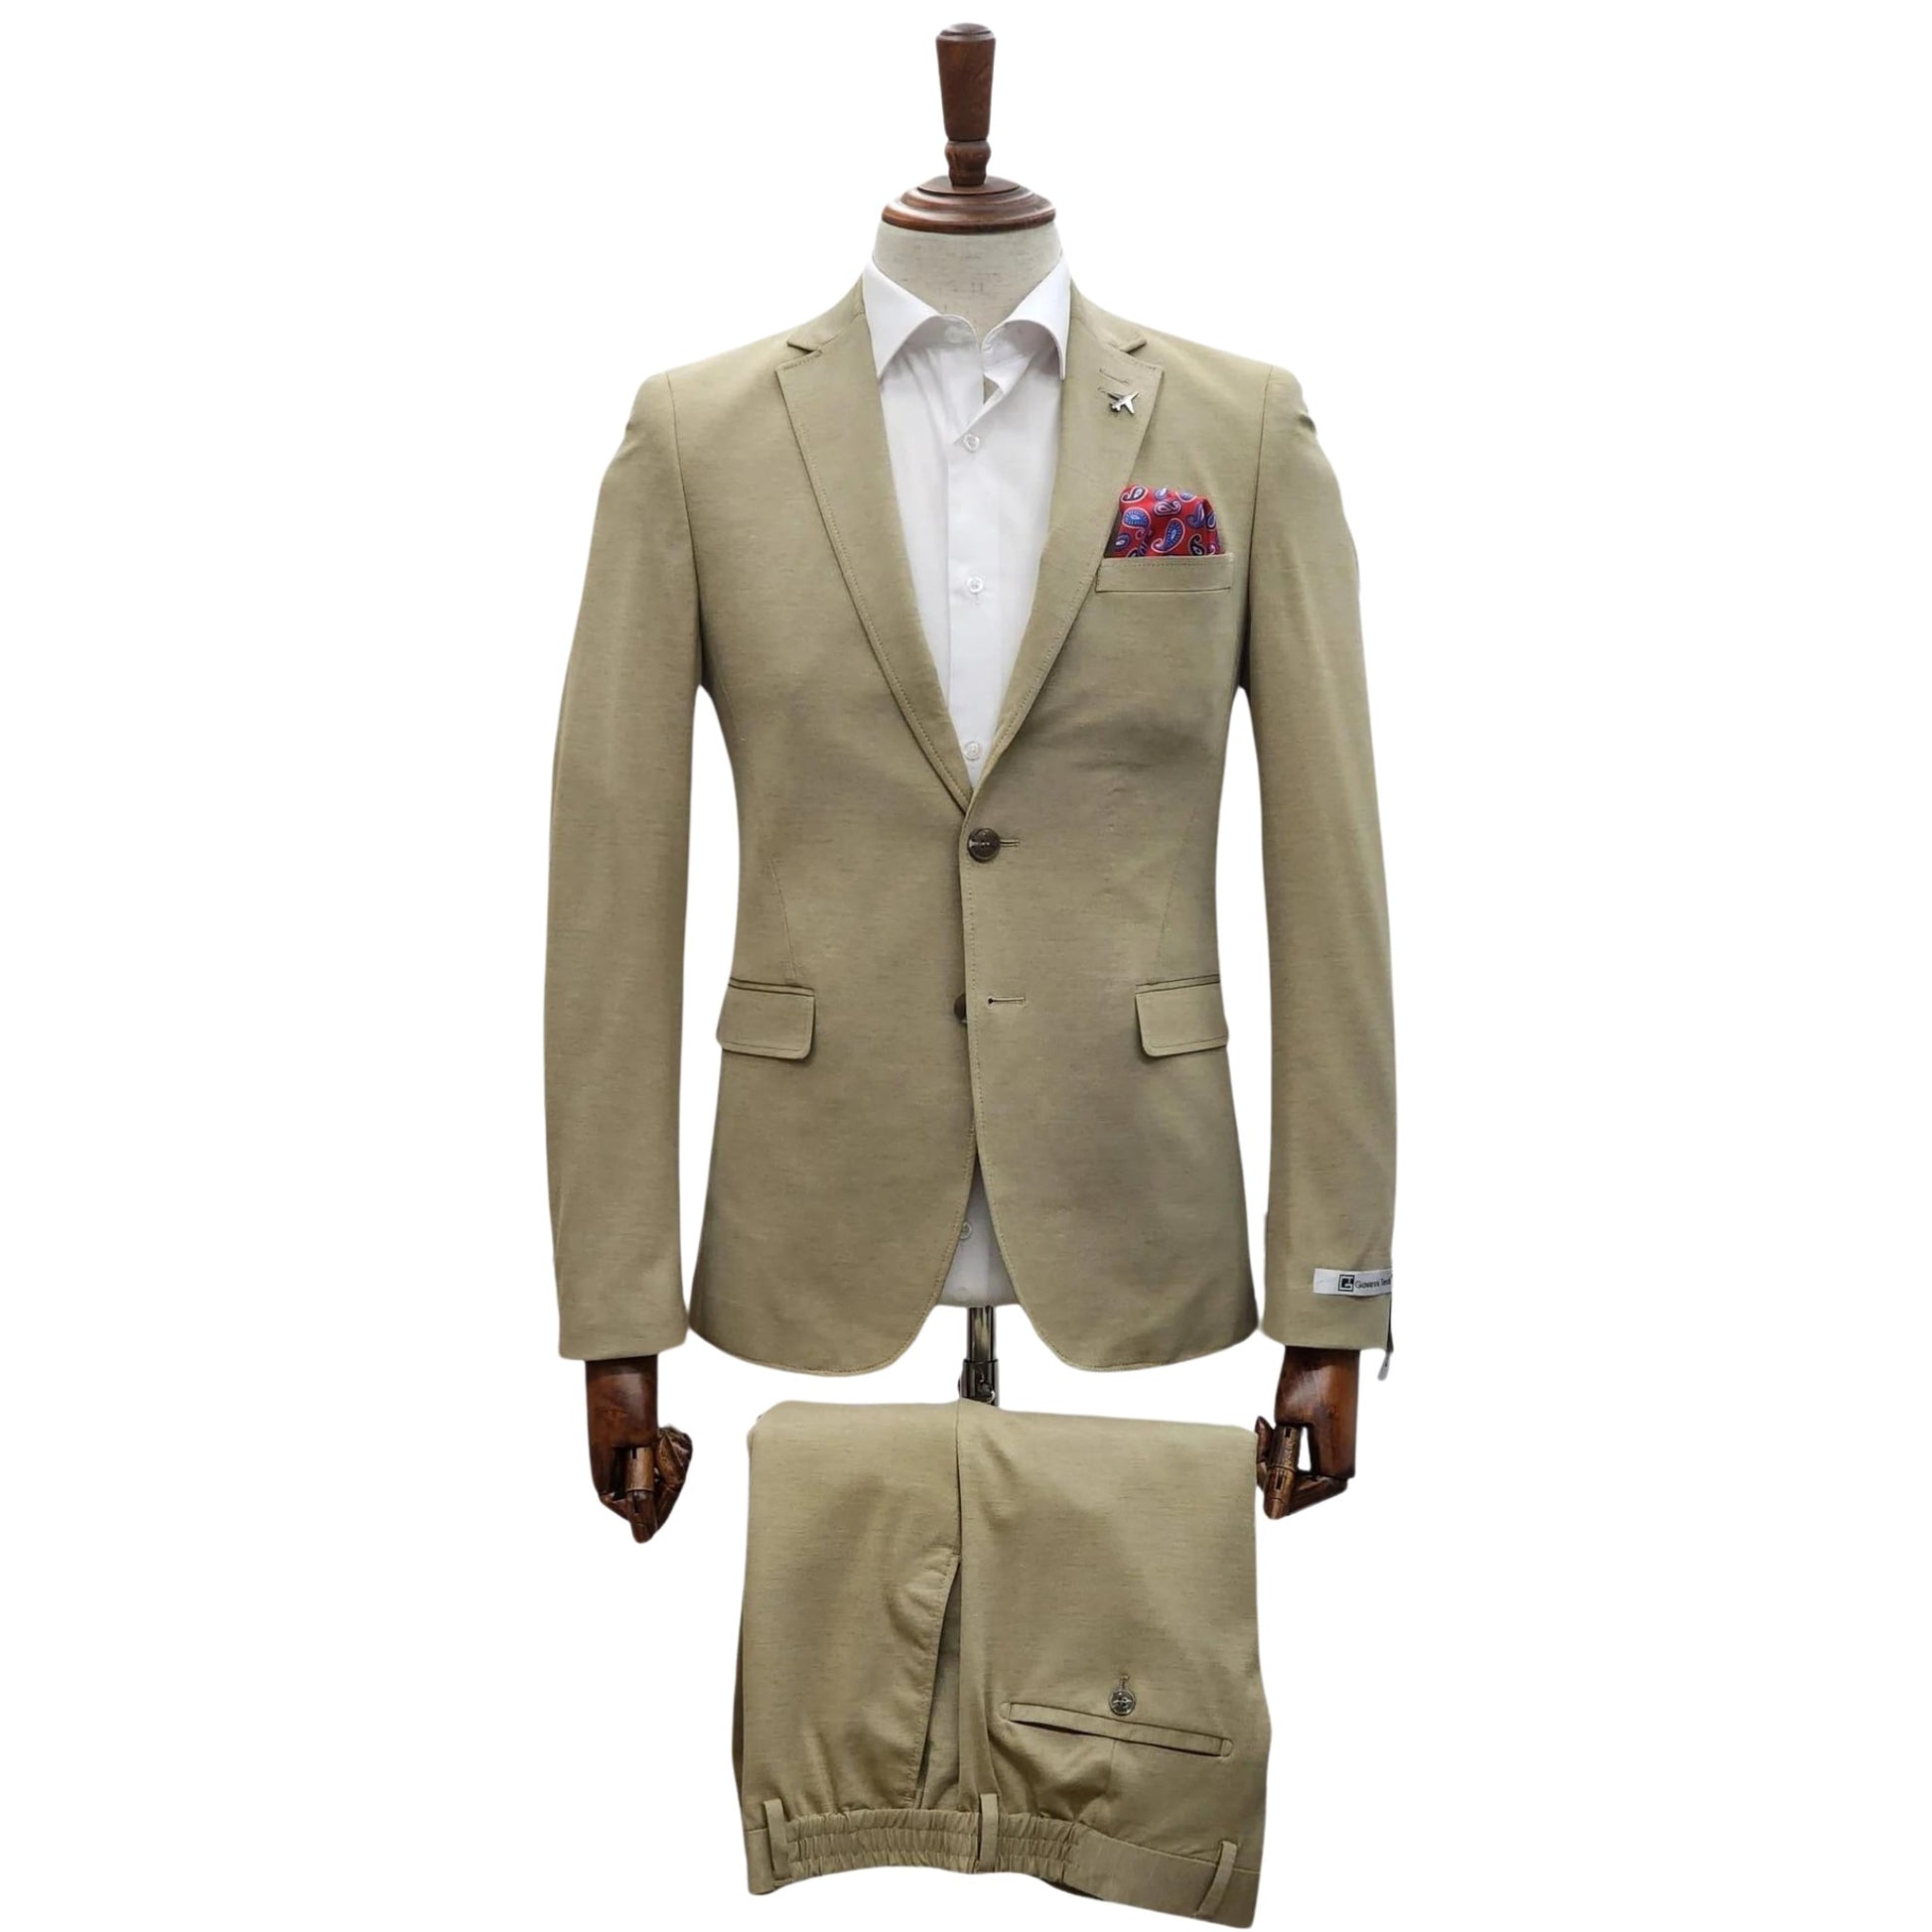 Mannequin displaying KCT Menswear Tan Stretch Cotton Suit Set with a colorful pocket square for a refined look